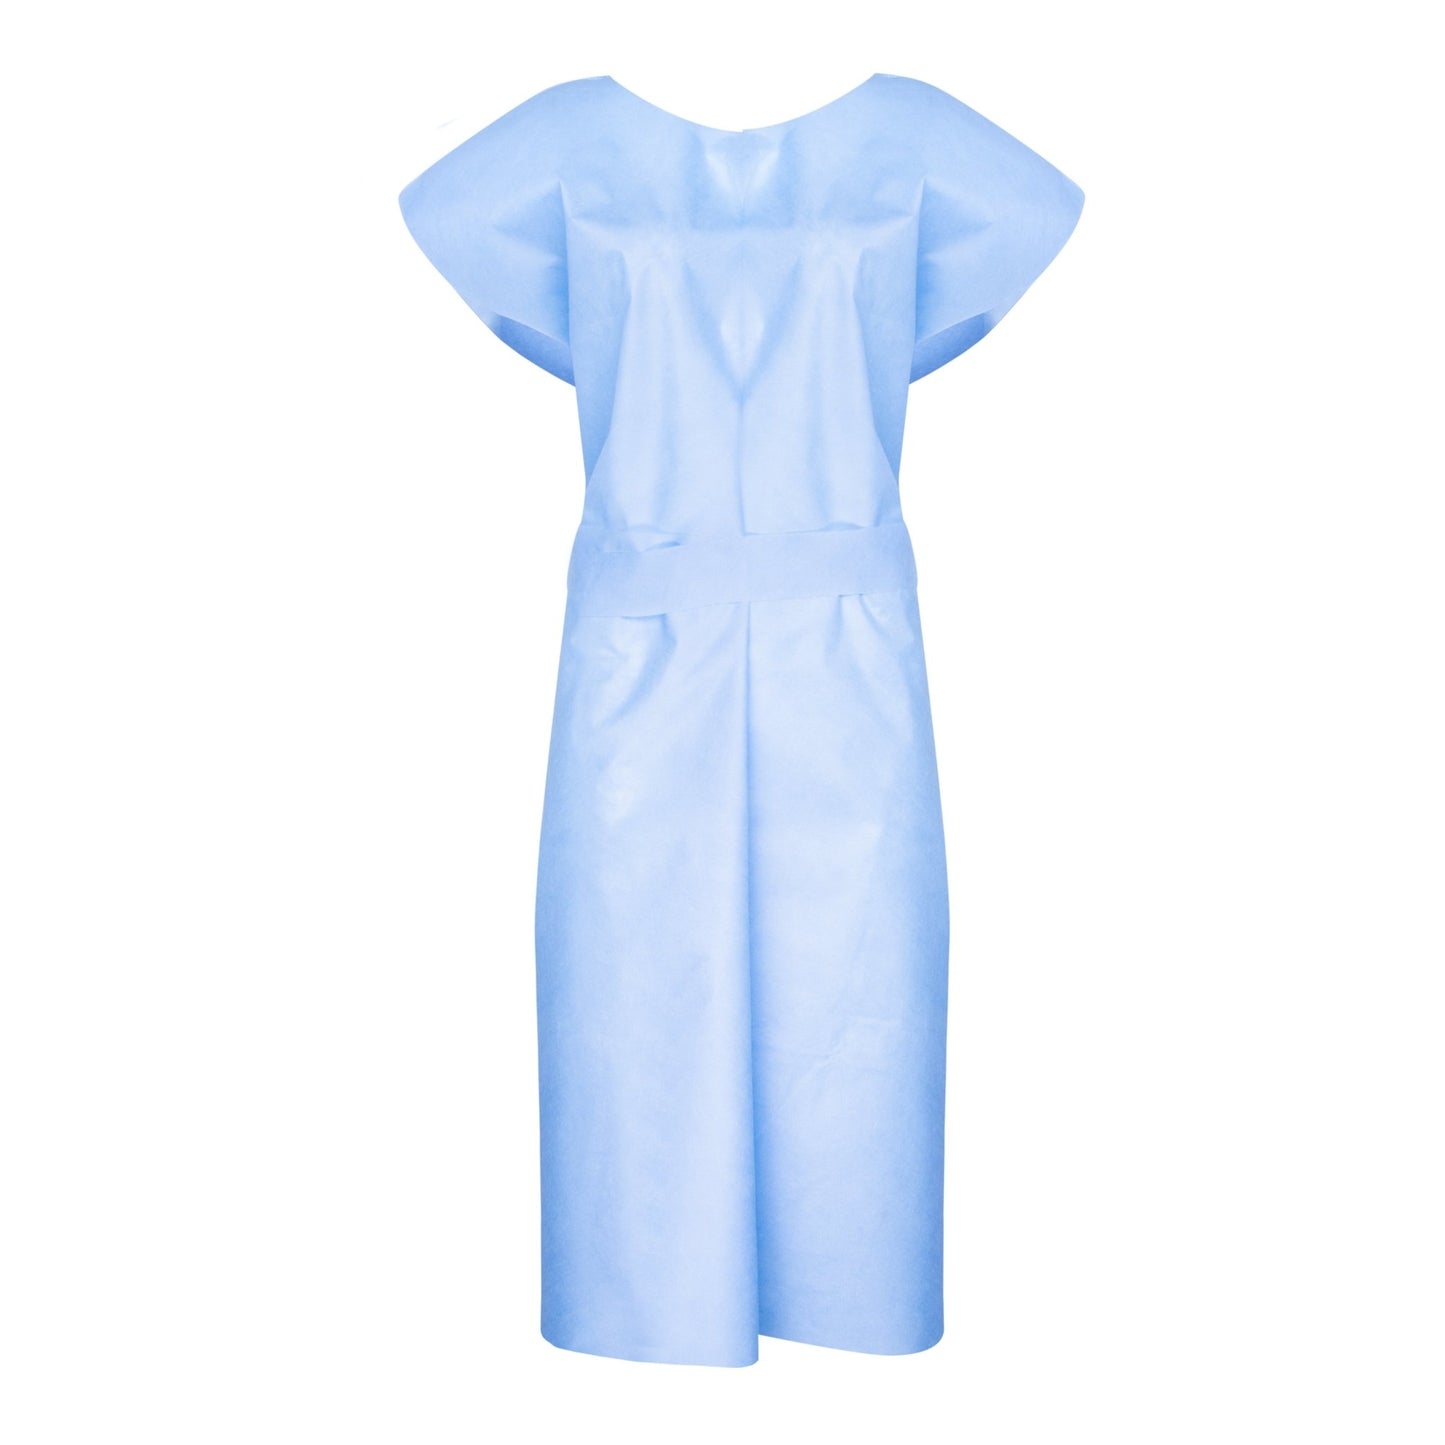 Pediatric Exam Gowns - Disposable - 25 Pack - DisposableGowns.com